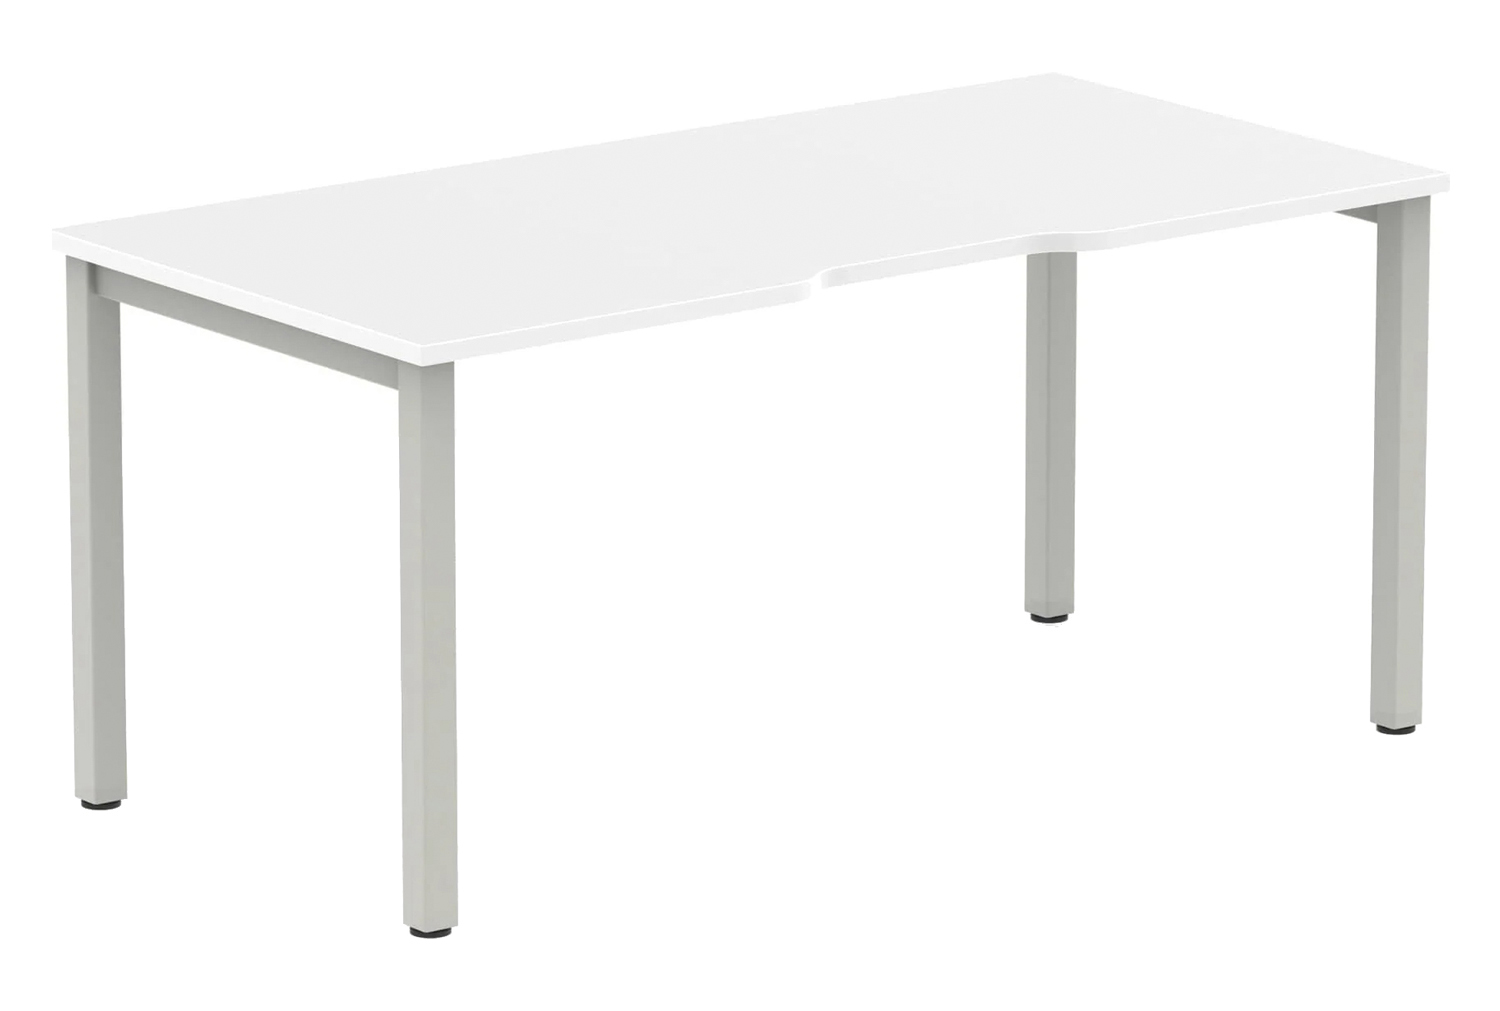 Pamola Single Bench Office Desk (Silver Legs), 140wx80dx73h (cm), White, Fully Installed